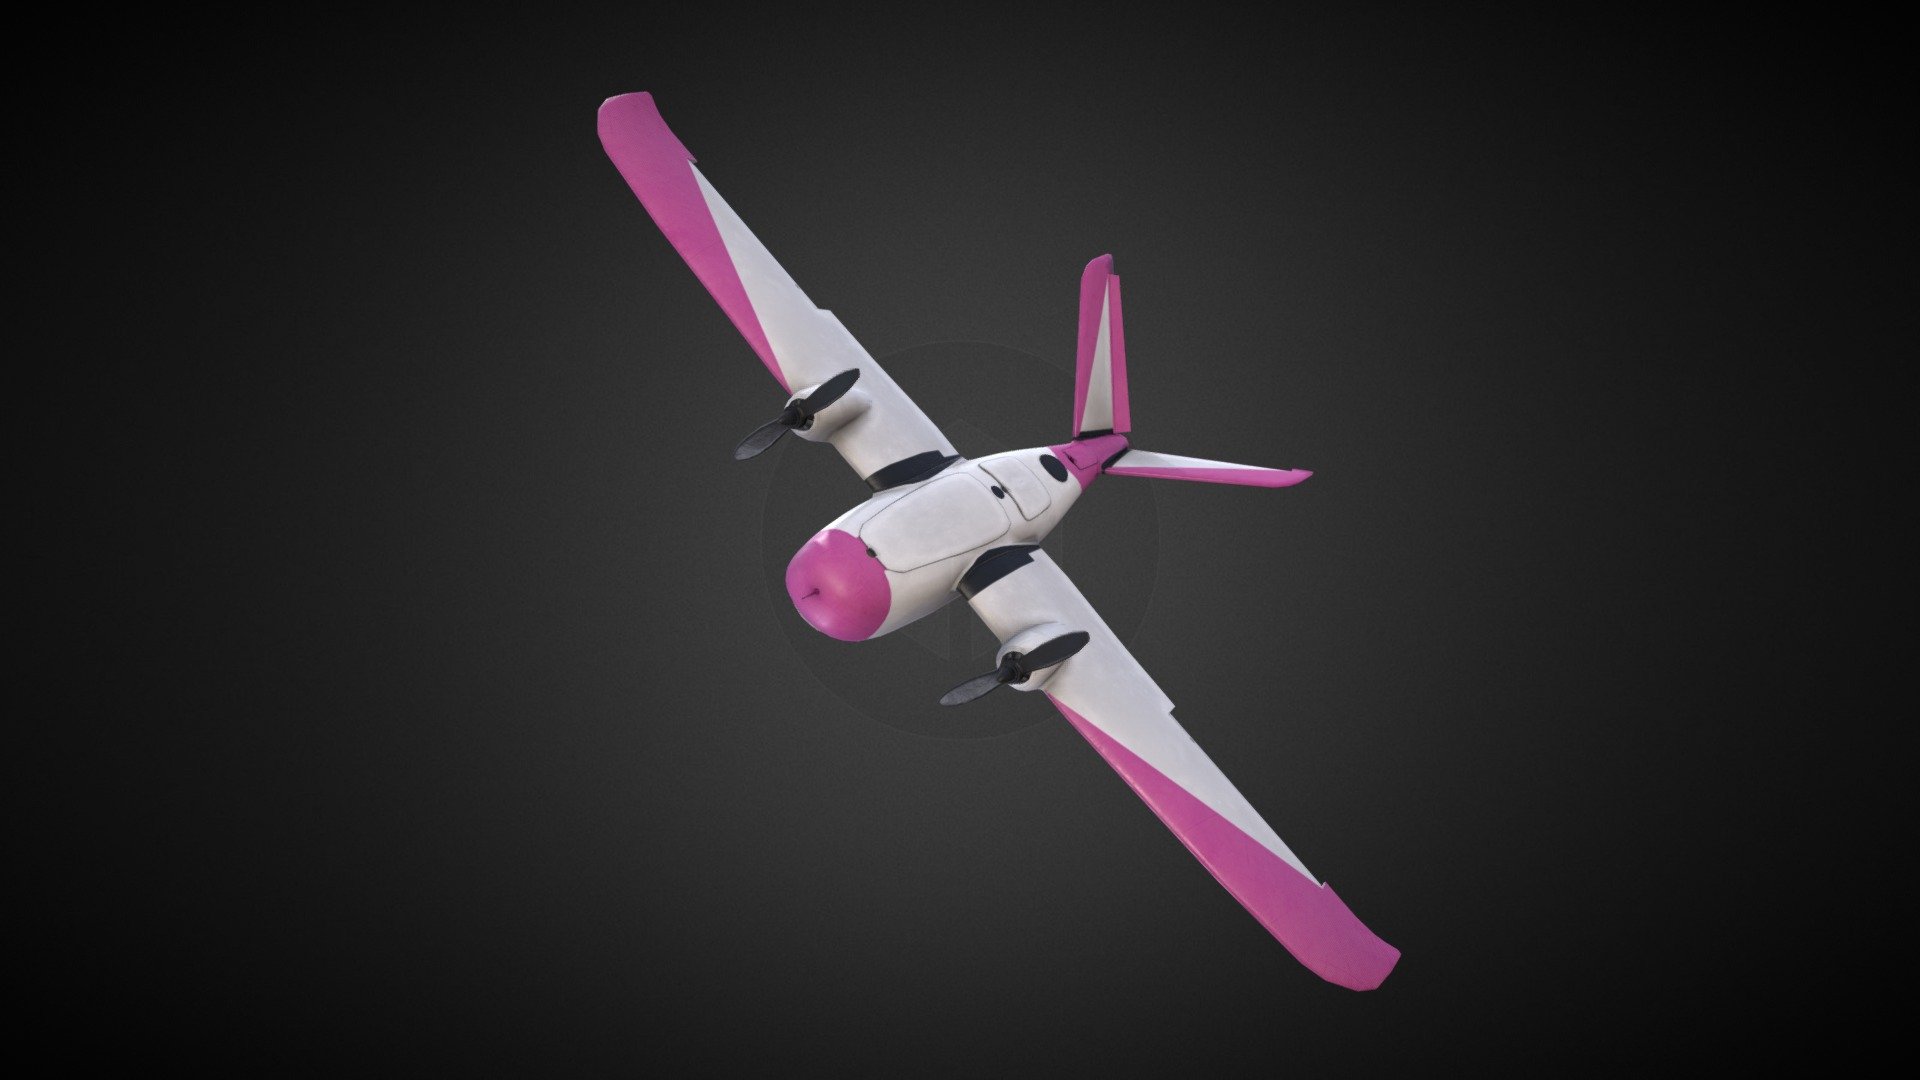 A Believer drone, made in 2 days for use in VBS3/4 - Believer Drone - 3D model by mjhathaway 3d model